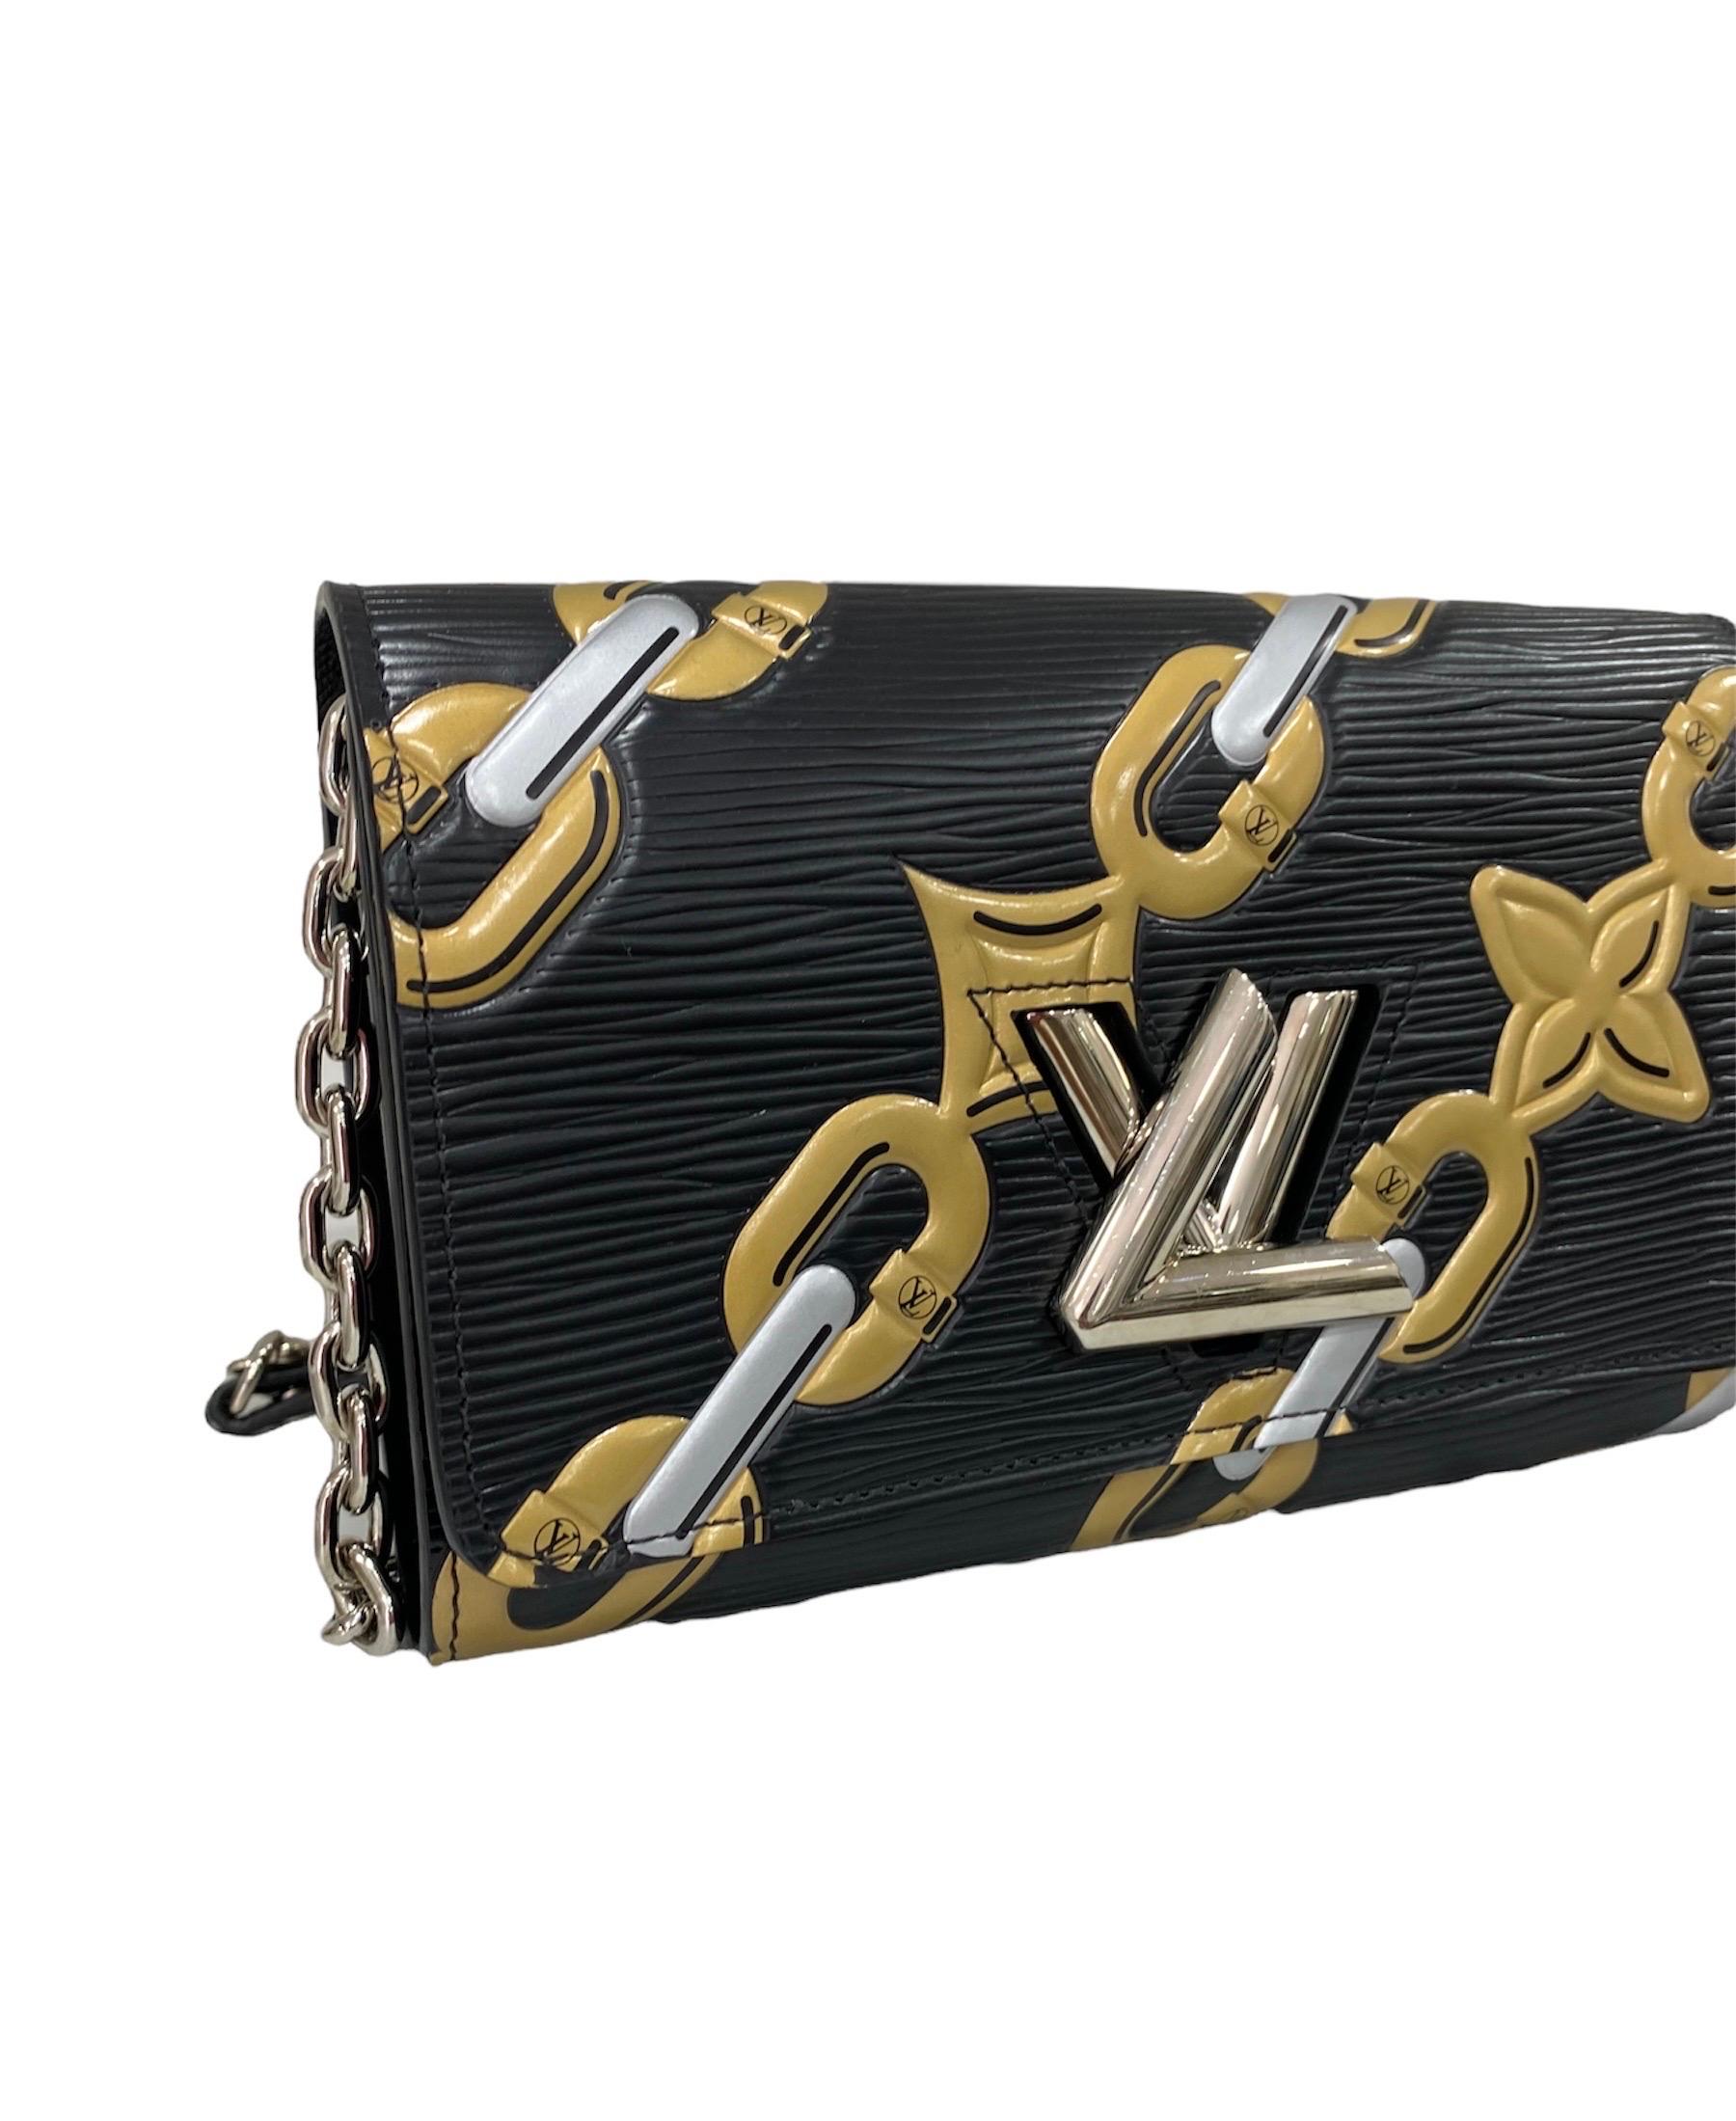 Louis Vuitton bag, Twist line, made of black epi leather, with chain pattern and silver hardware.

Equipped with a flap with interlocking LV logo closure, internally lined in black leather, roomy for the essentials.

Equipped with a leather and